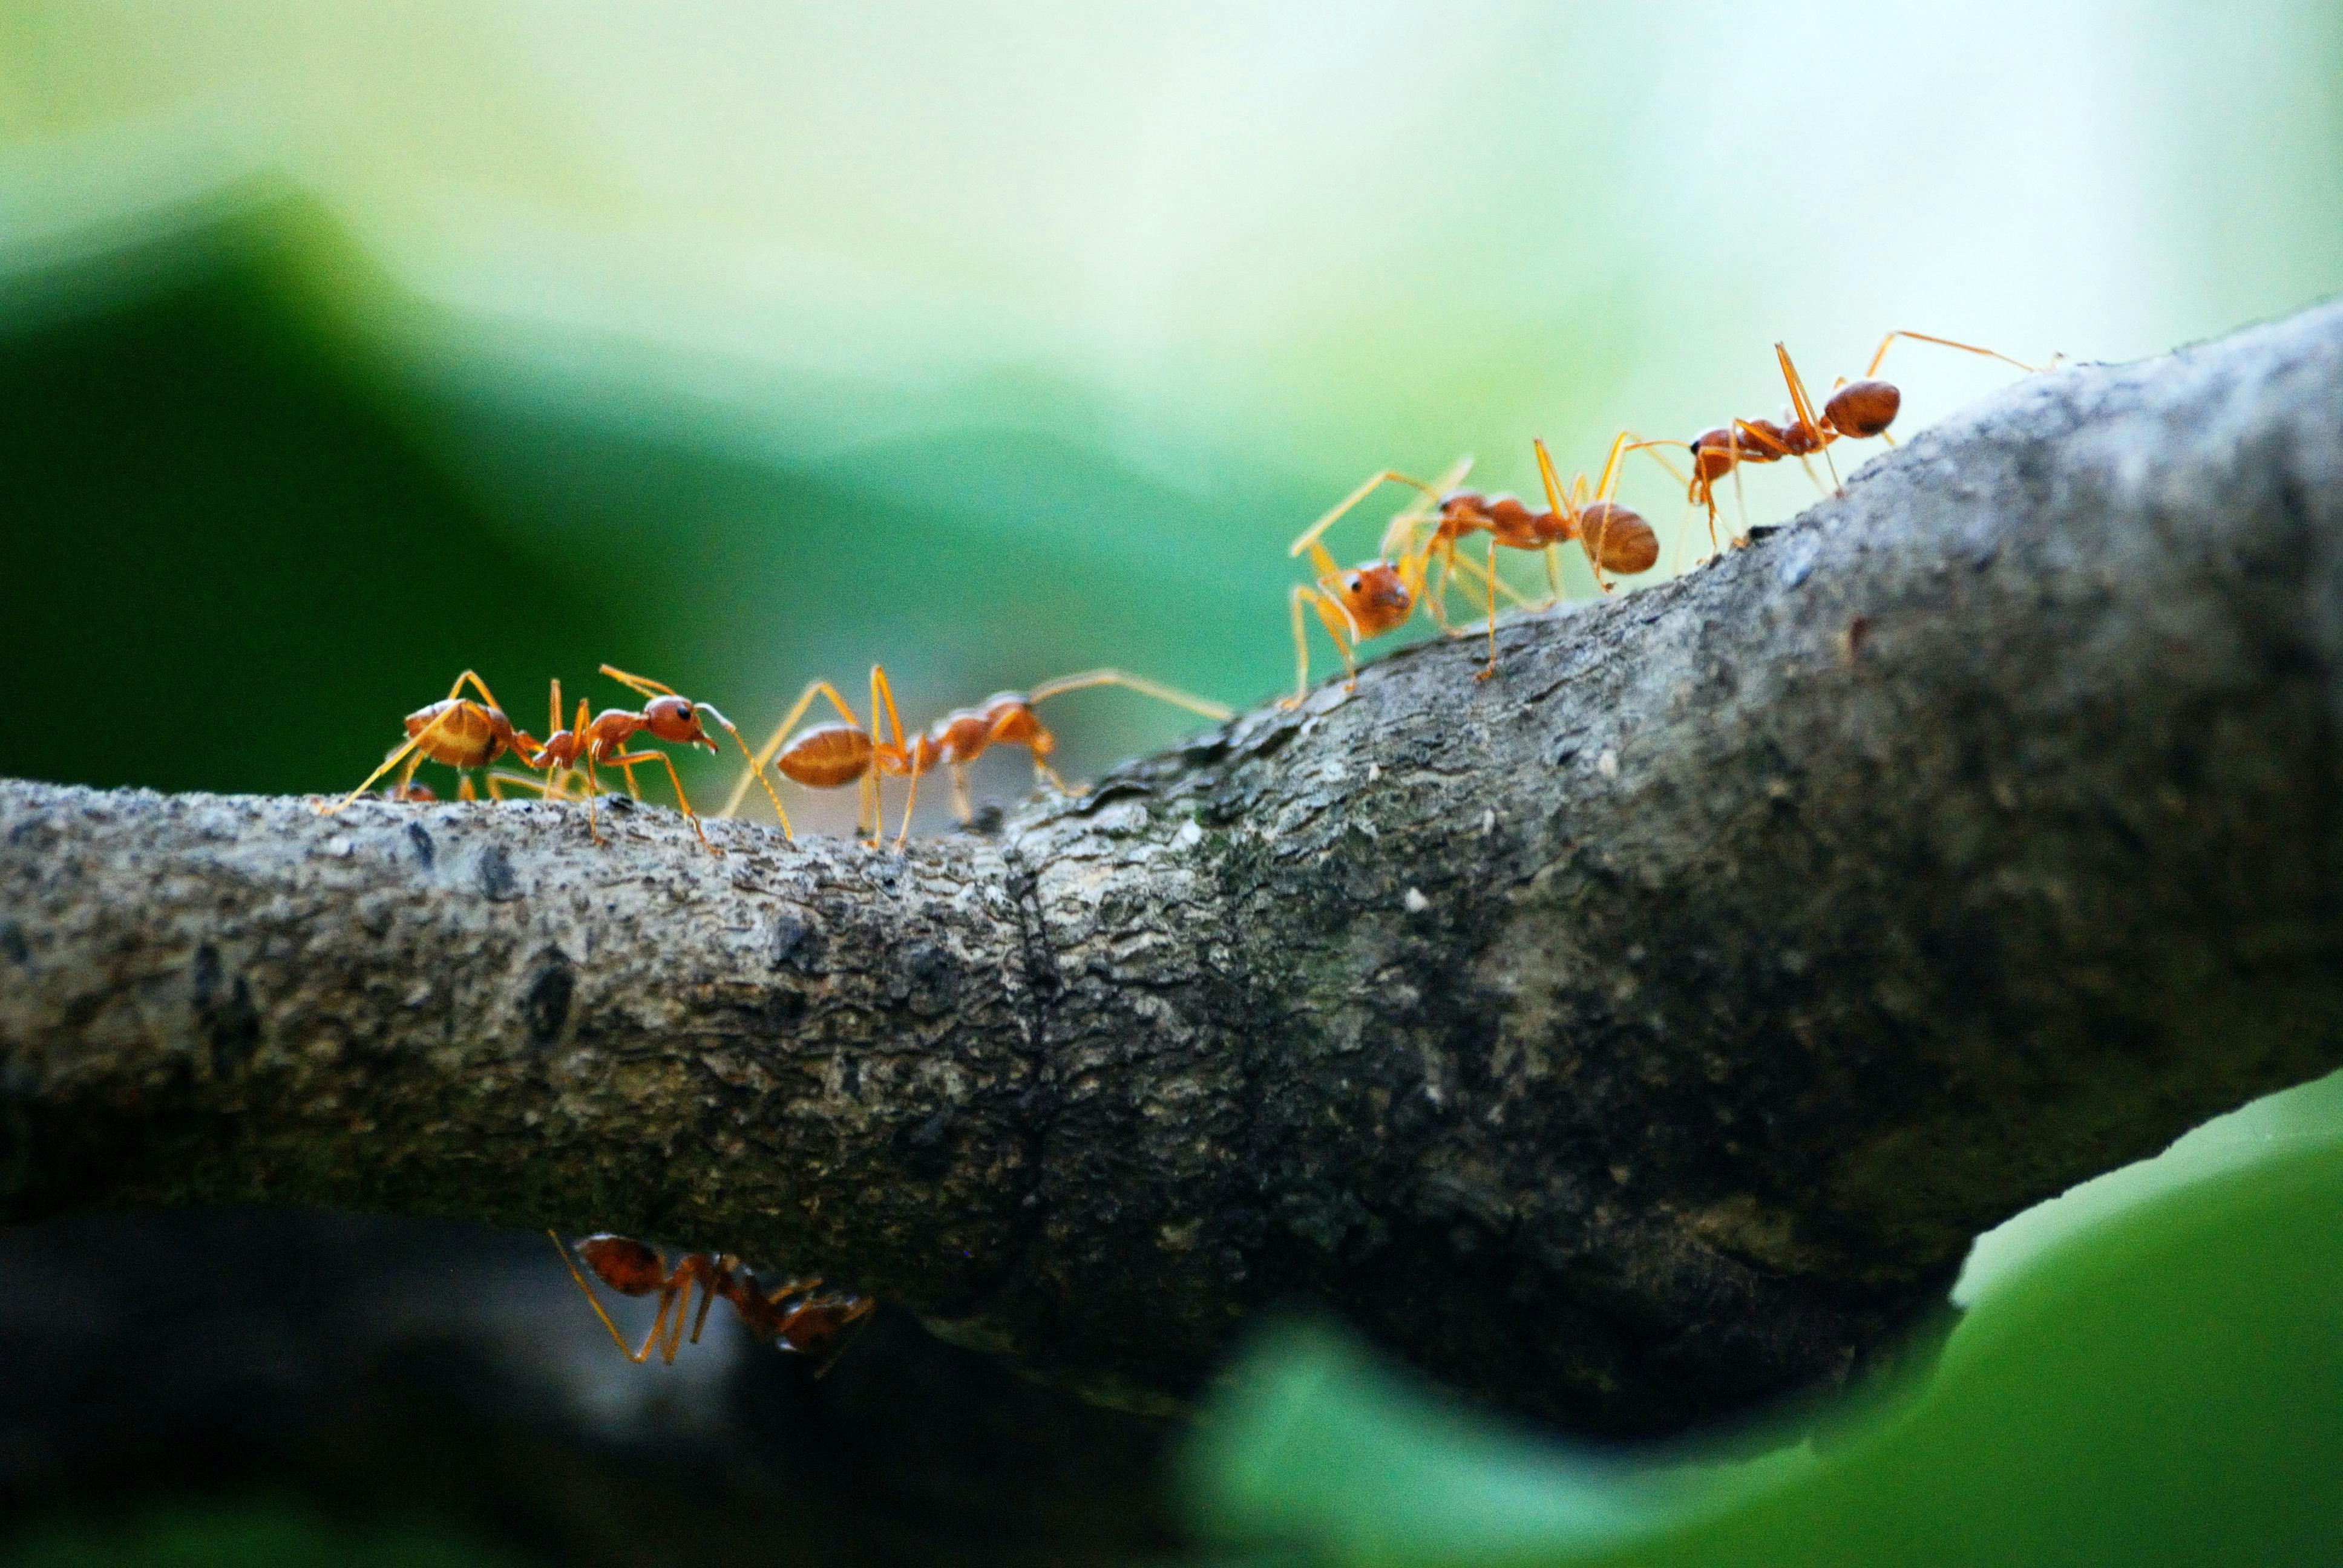 A close up photo on ants on top of a tree branch | Source: Pexels